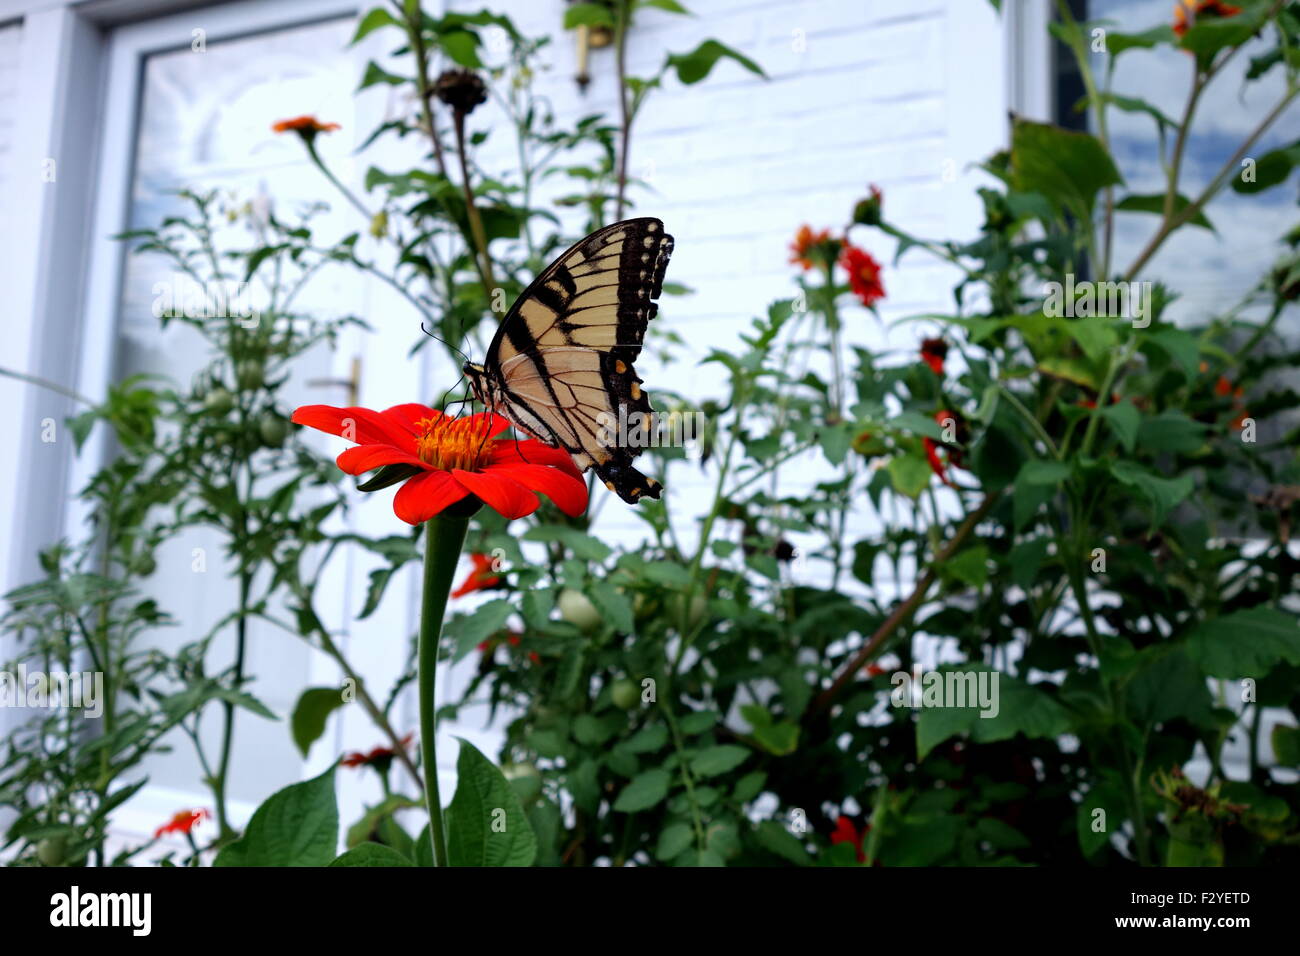 Monarch butterfly on Mexican Sunflower in home garden Stock Photo